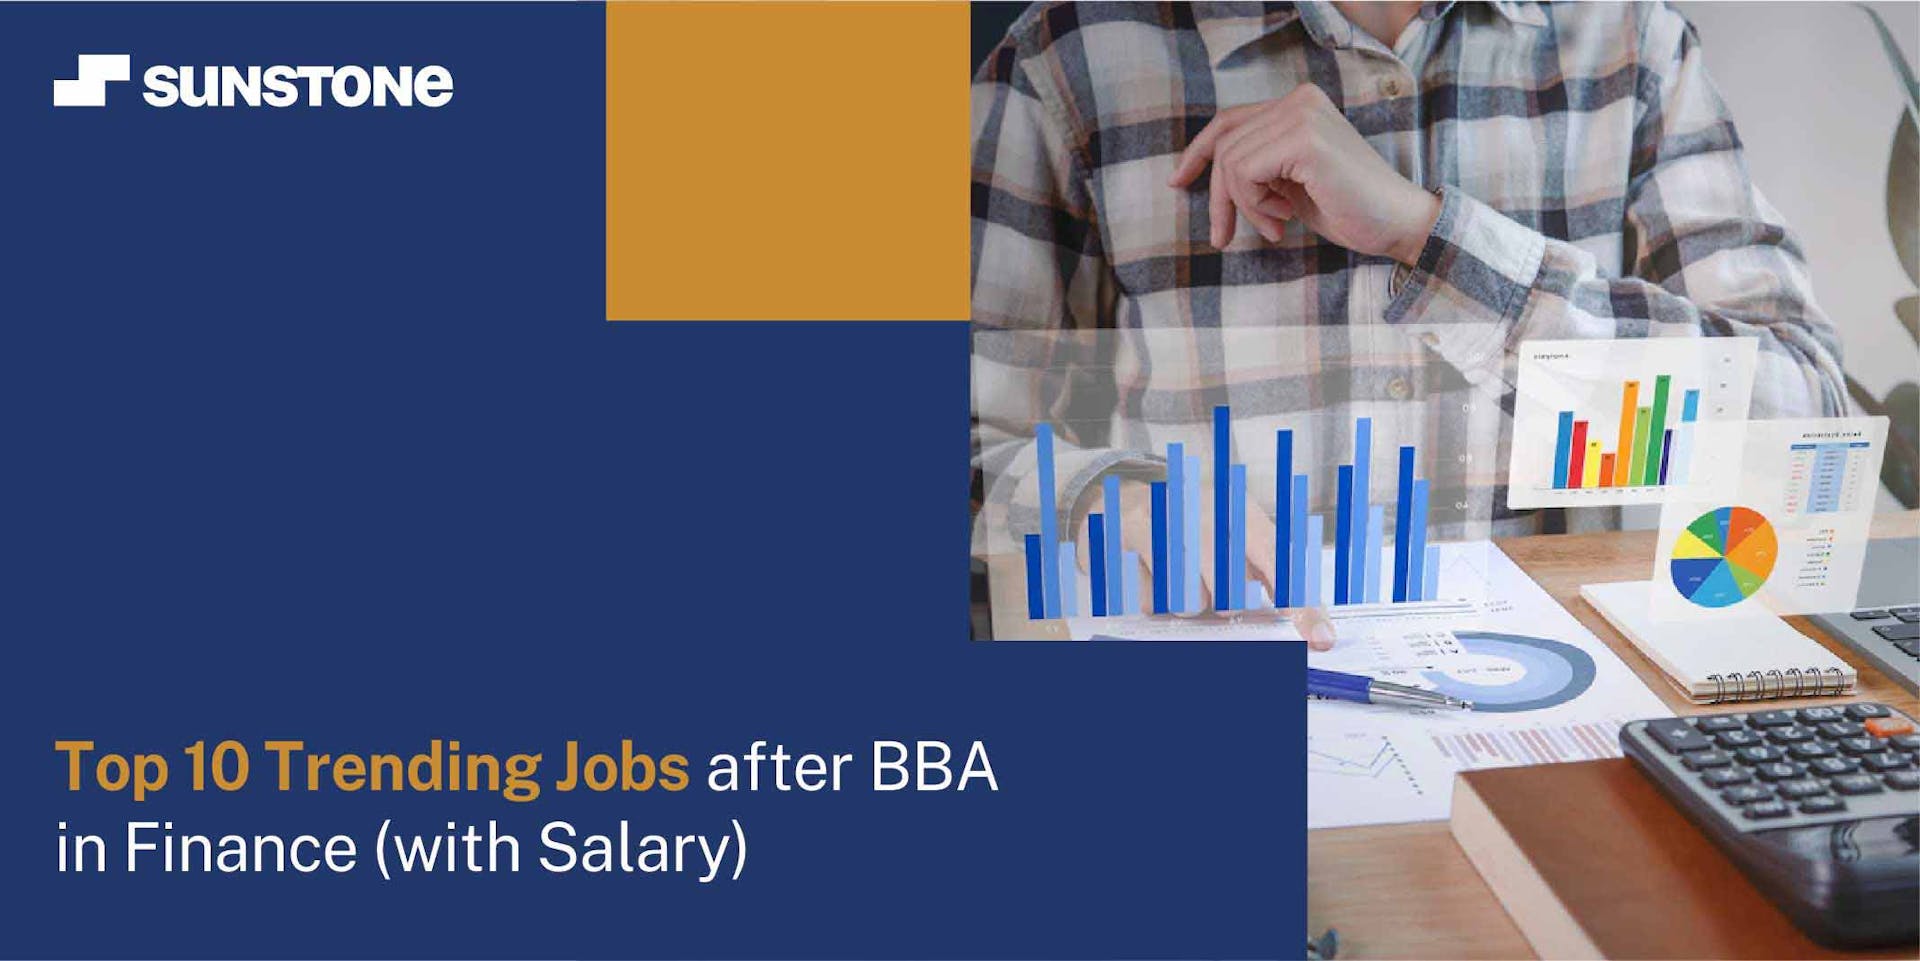 Top 10 Trending Jobs after BBA in Finance (with Salary)